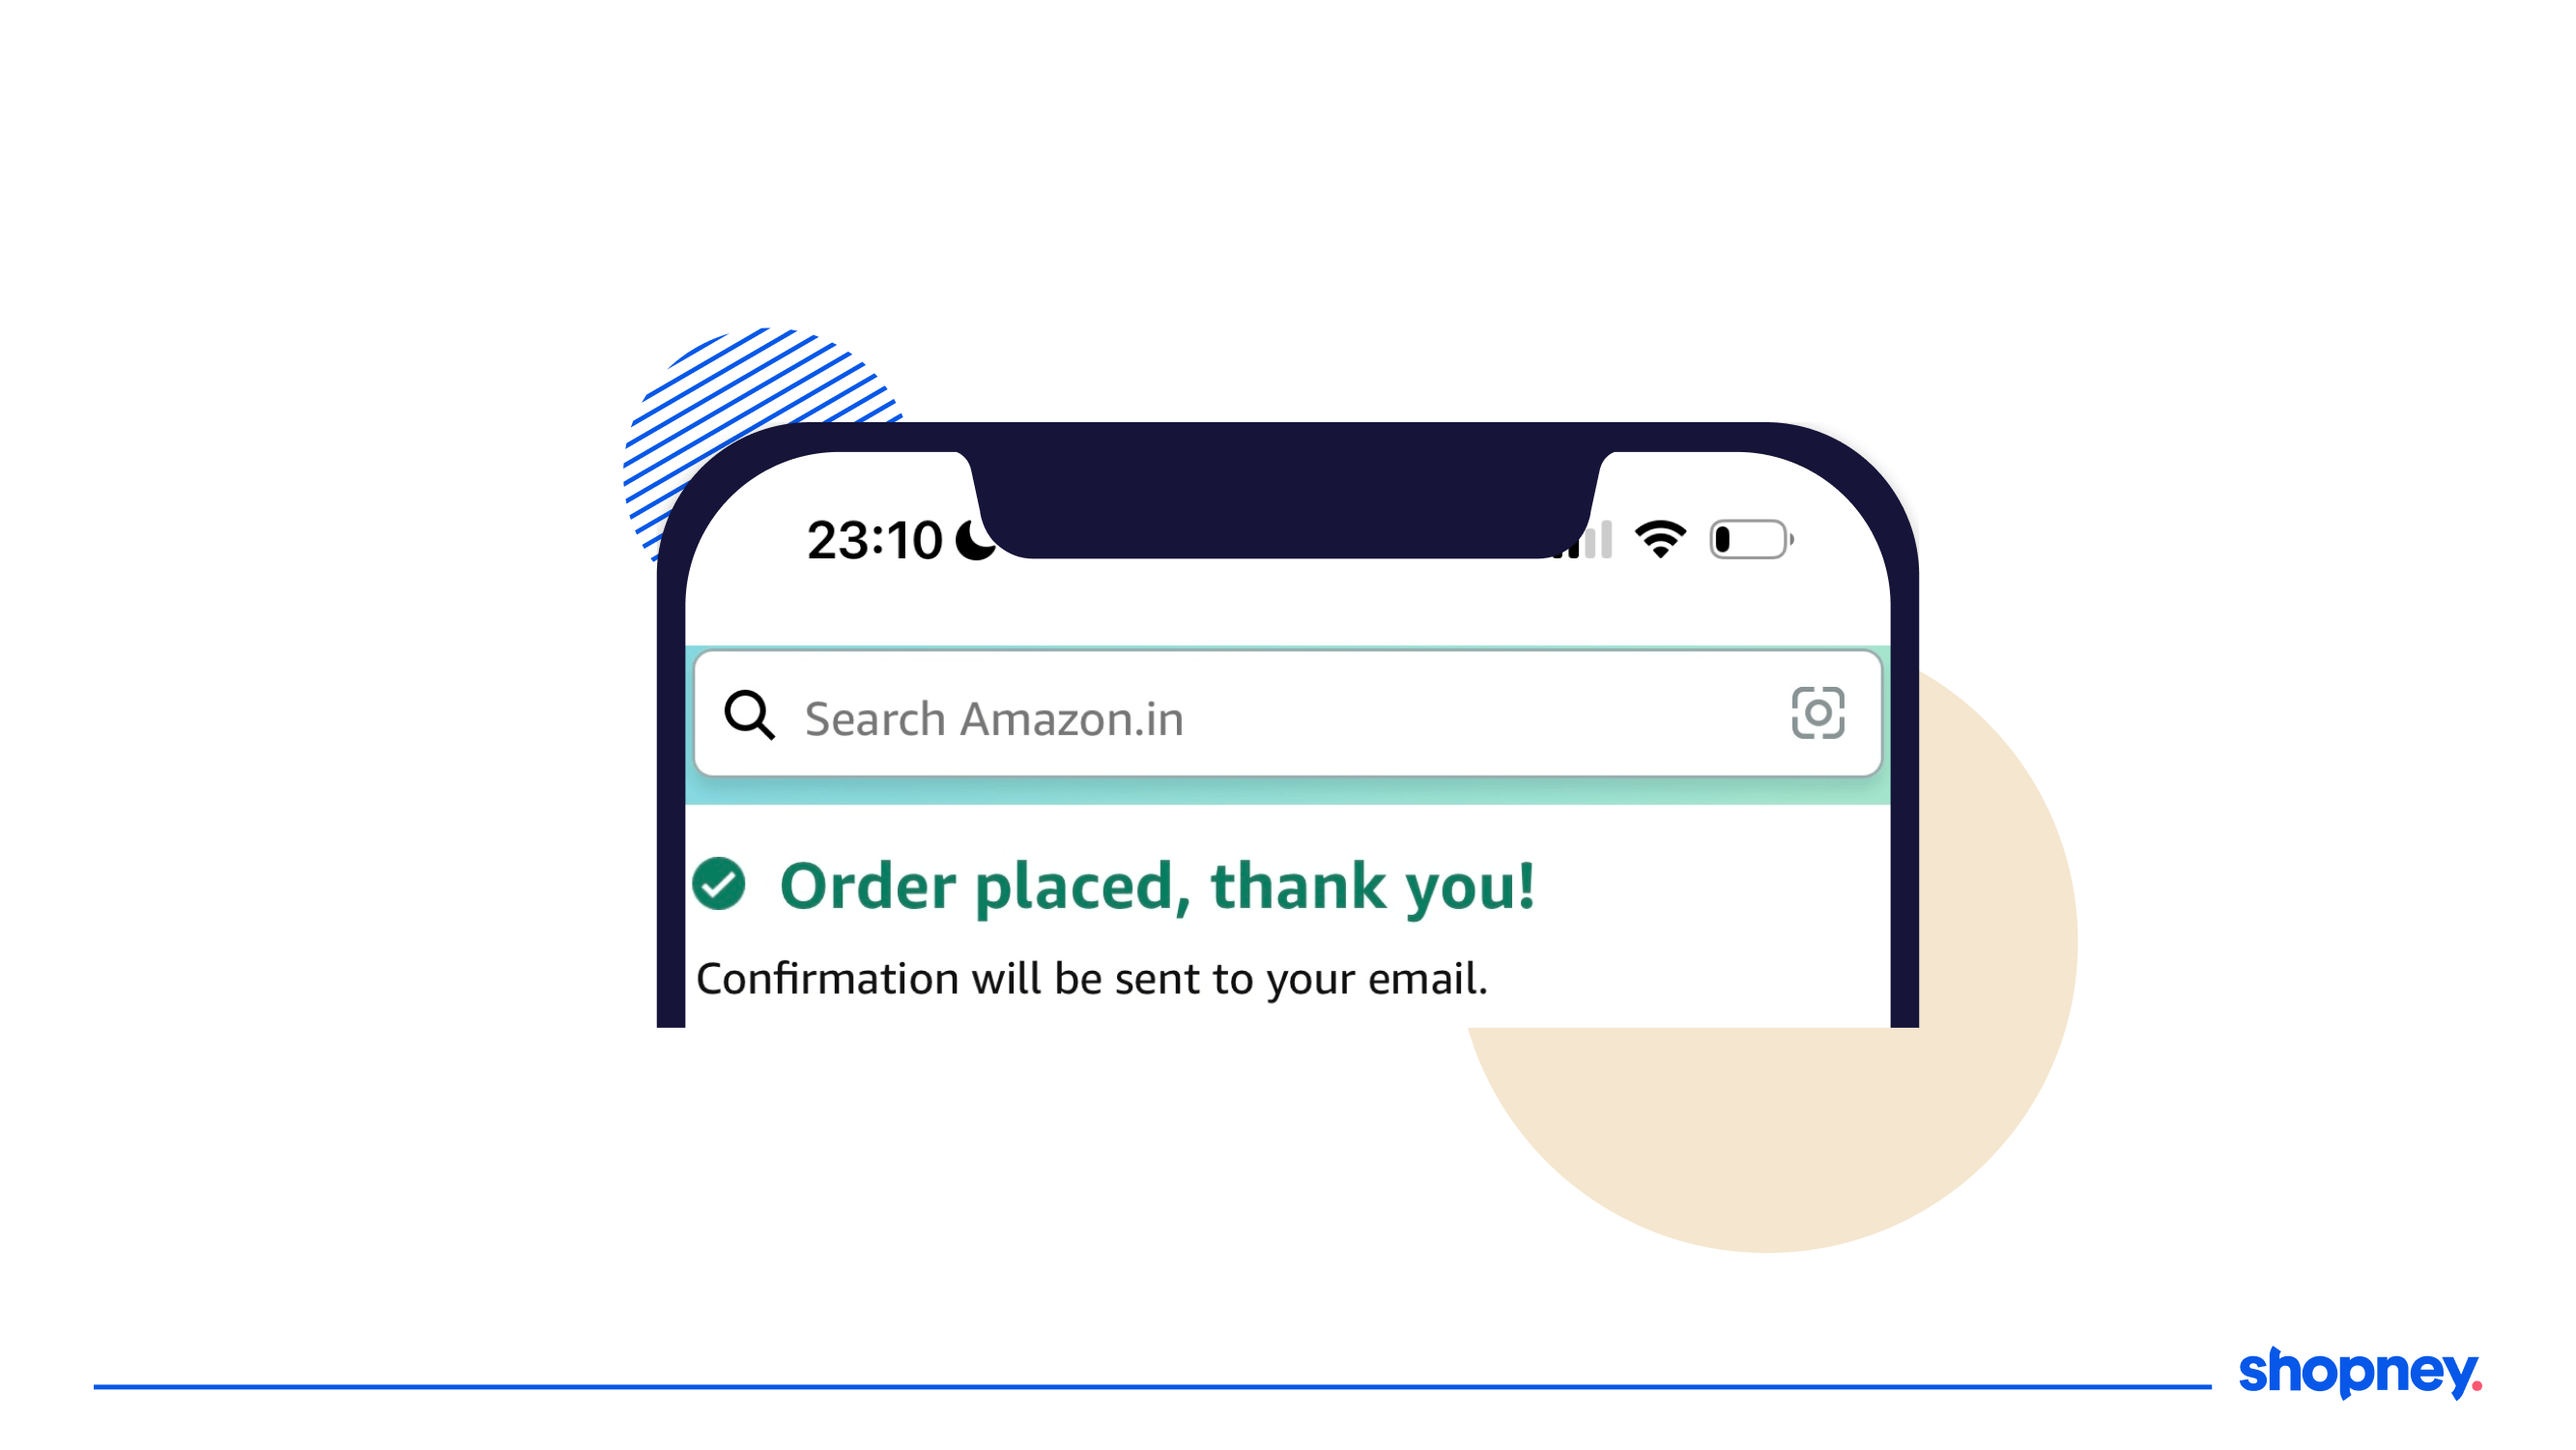 Displaying order confirmation message on the mobile app